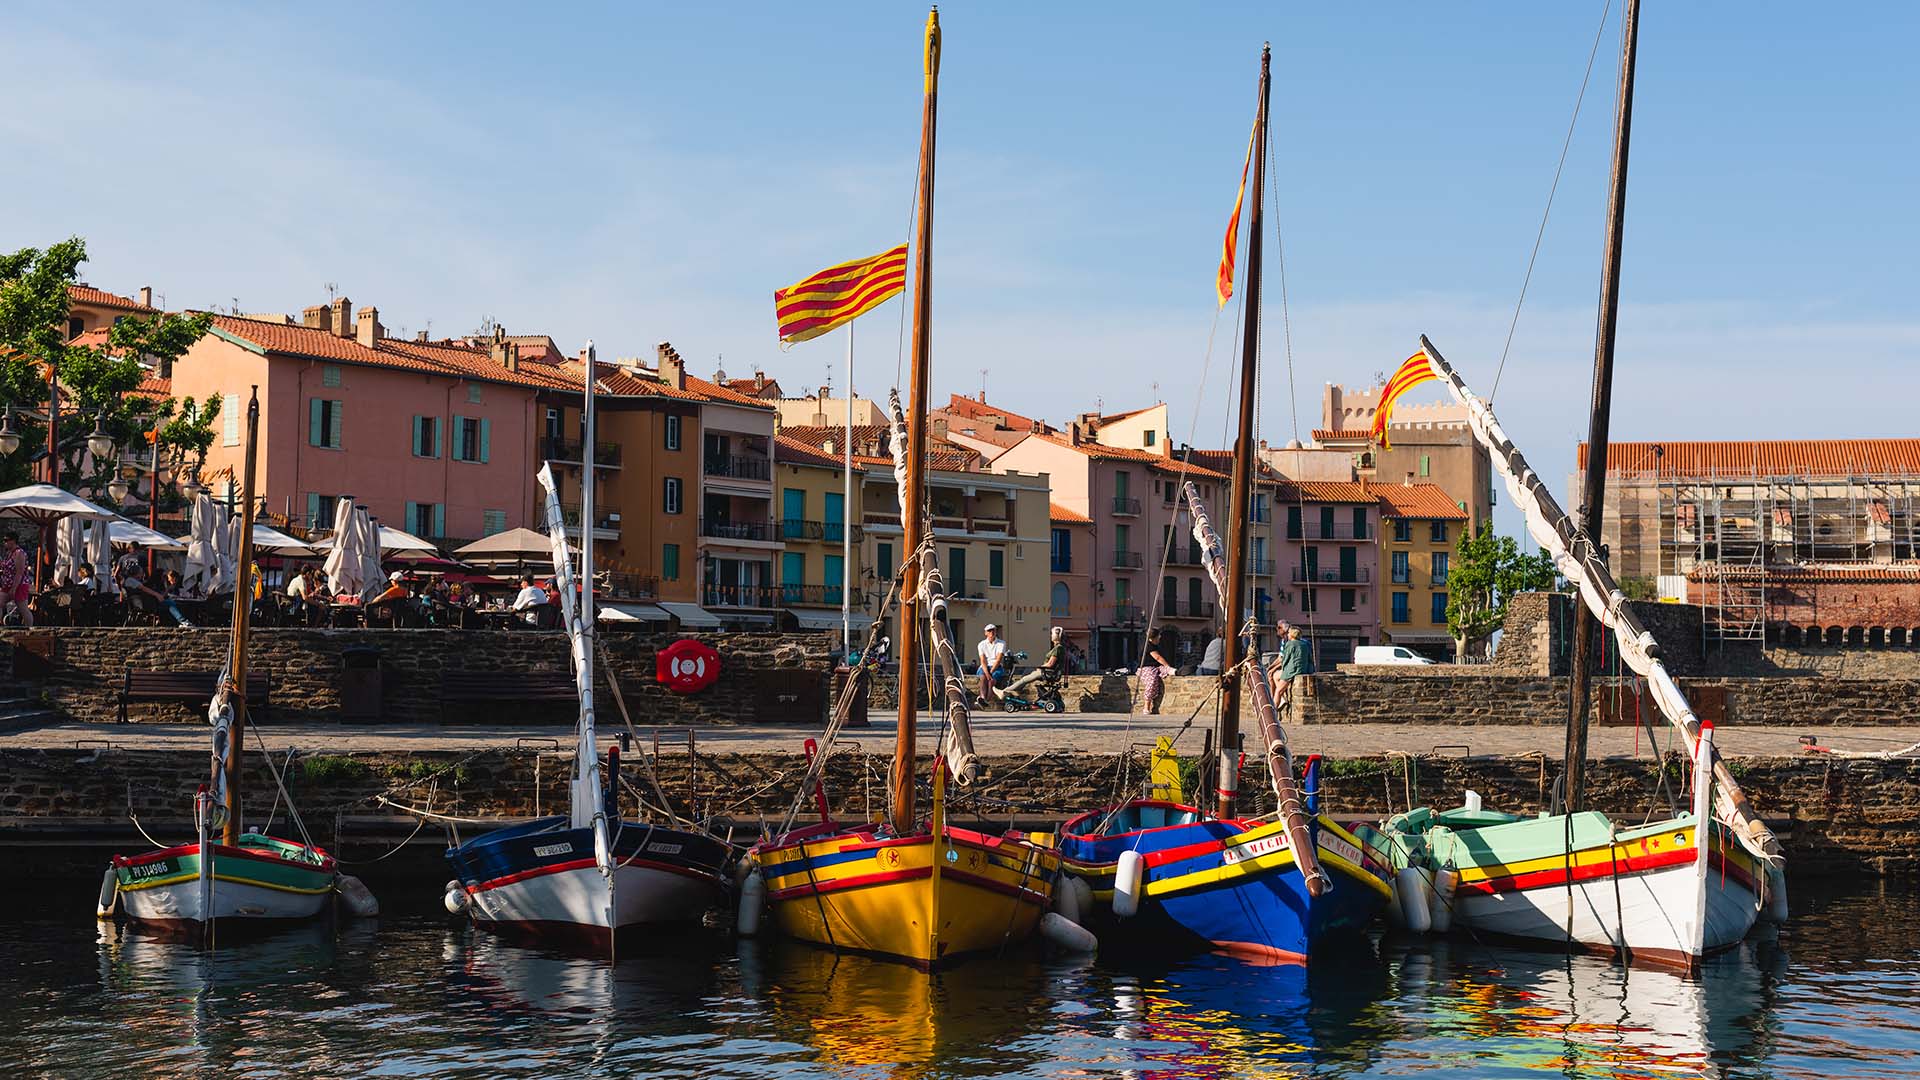 Colorful Catalan fishing boats moored in Collioure, France